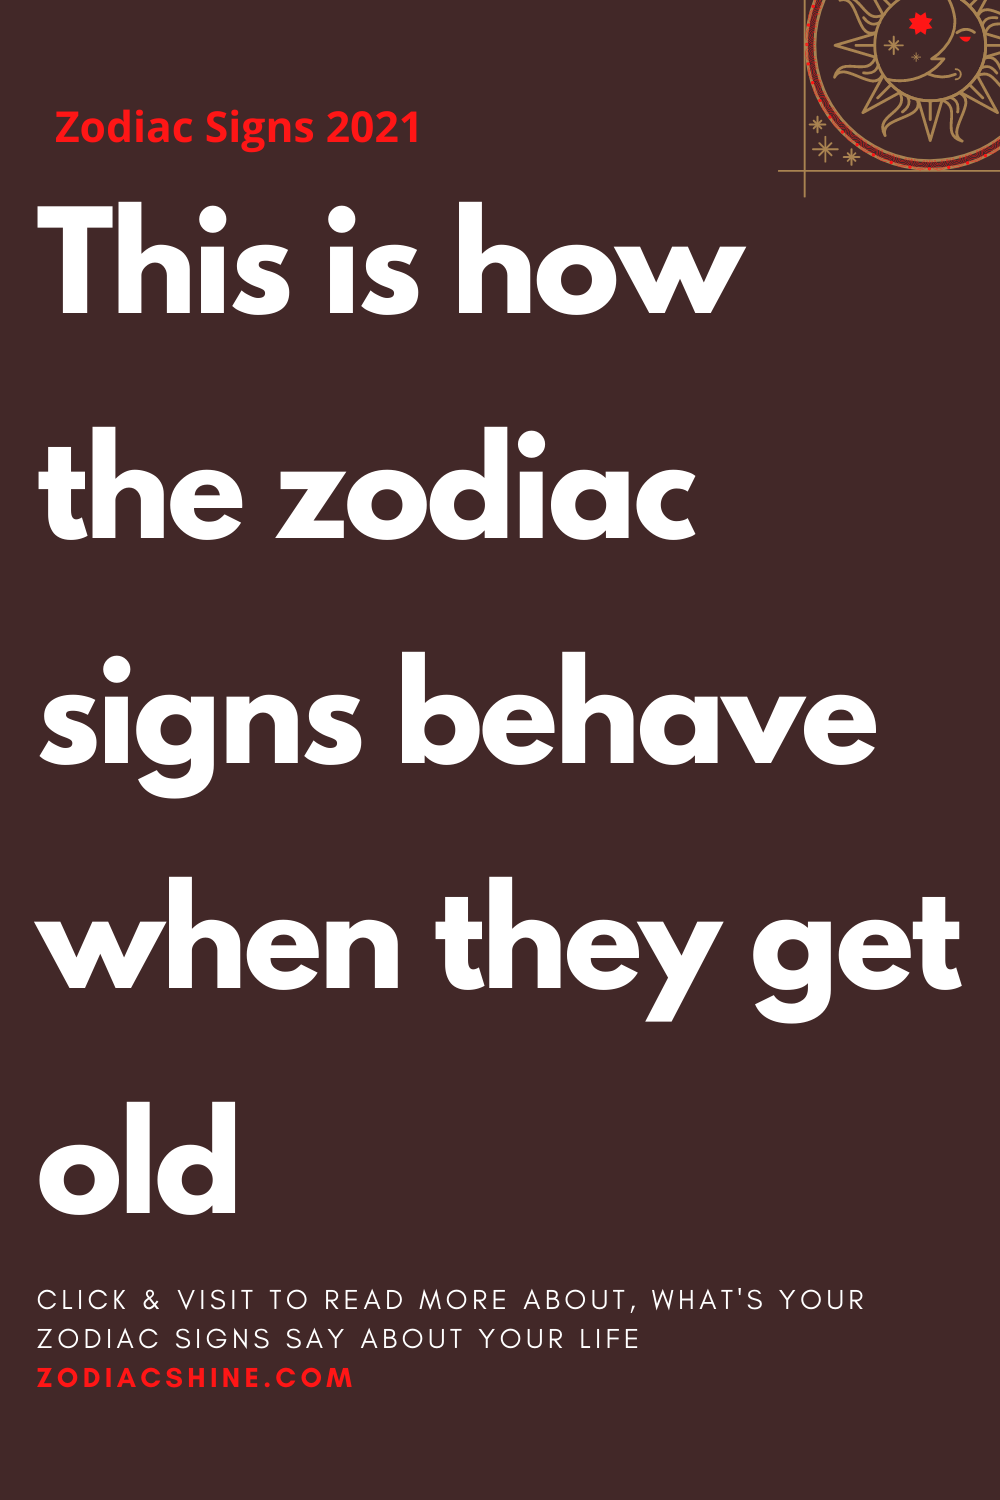 This is how the zodiac signs behave when they get old